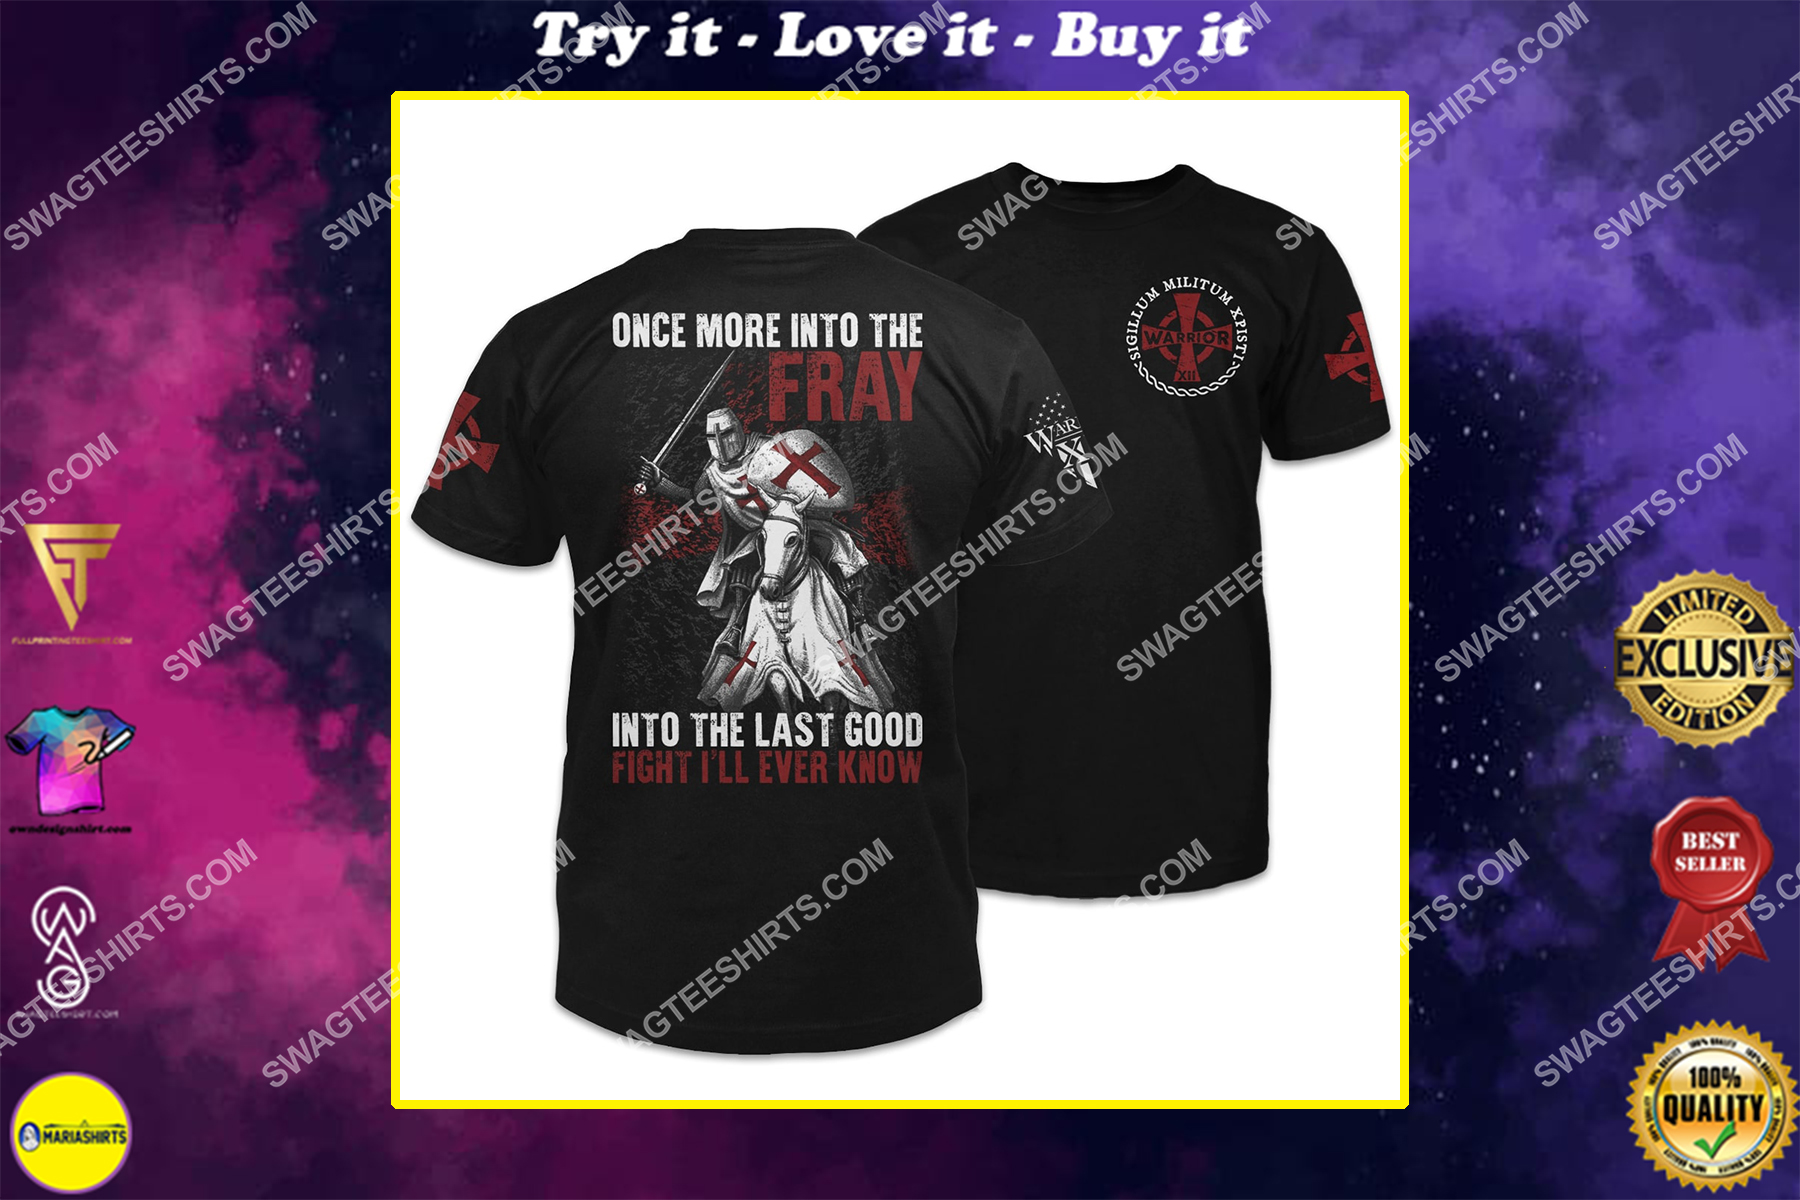 knight templar one more into the fray into the last good fight i'll ever know shirt